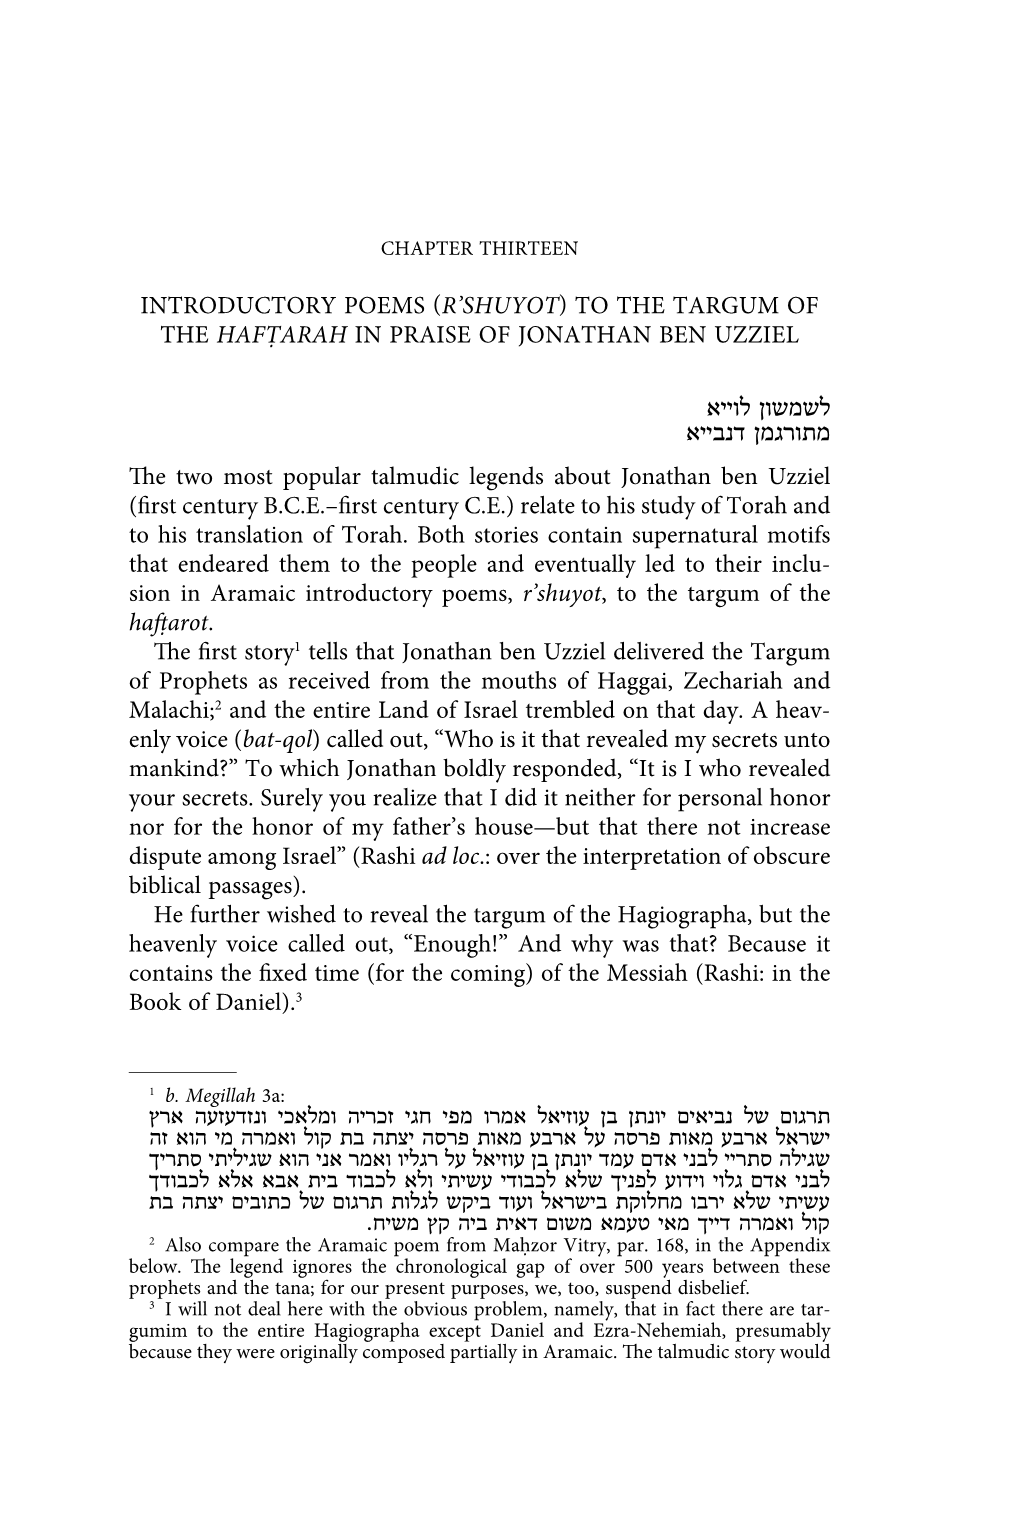 Introductory Poems (R’Shuyot) to the Targum of the Hafṭarah in Praise of Jonathan Ben Uzziel